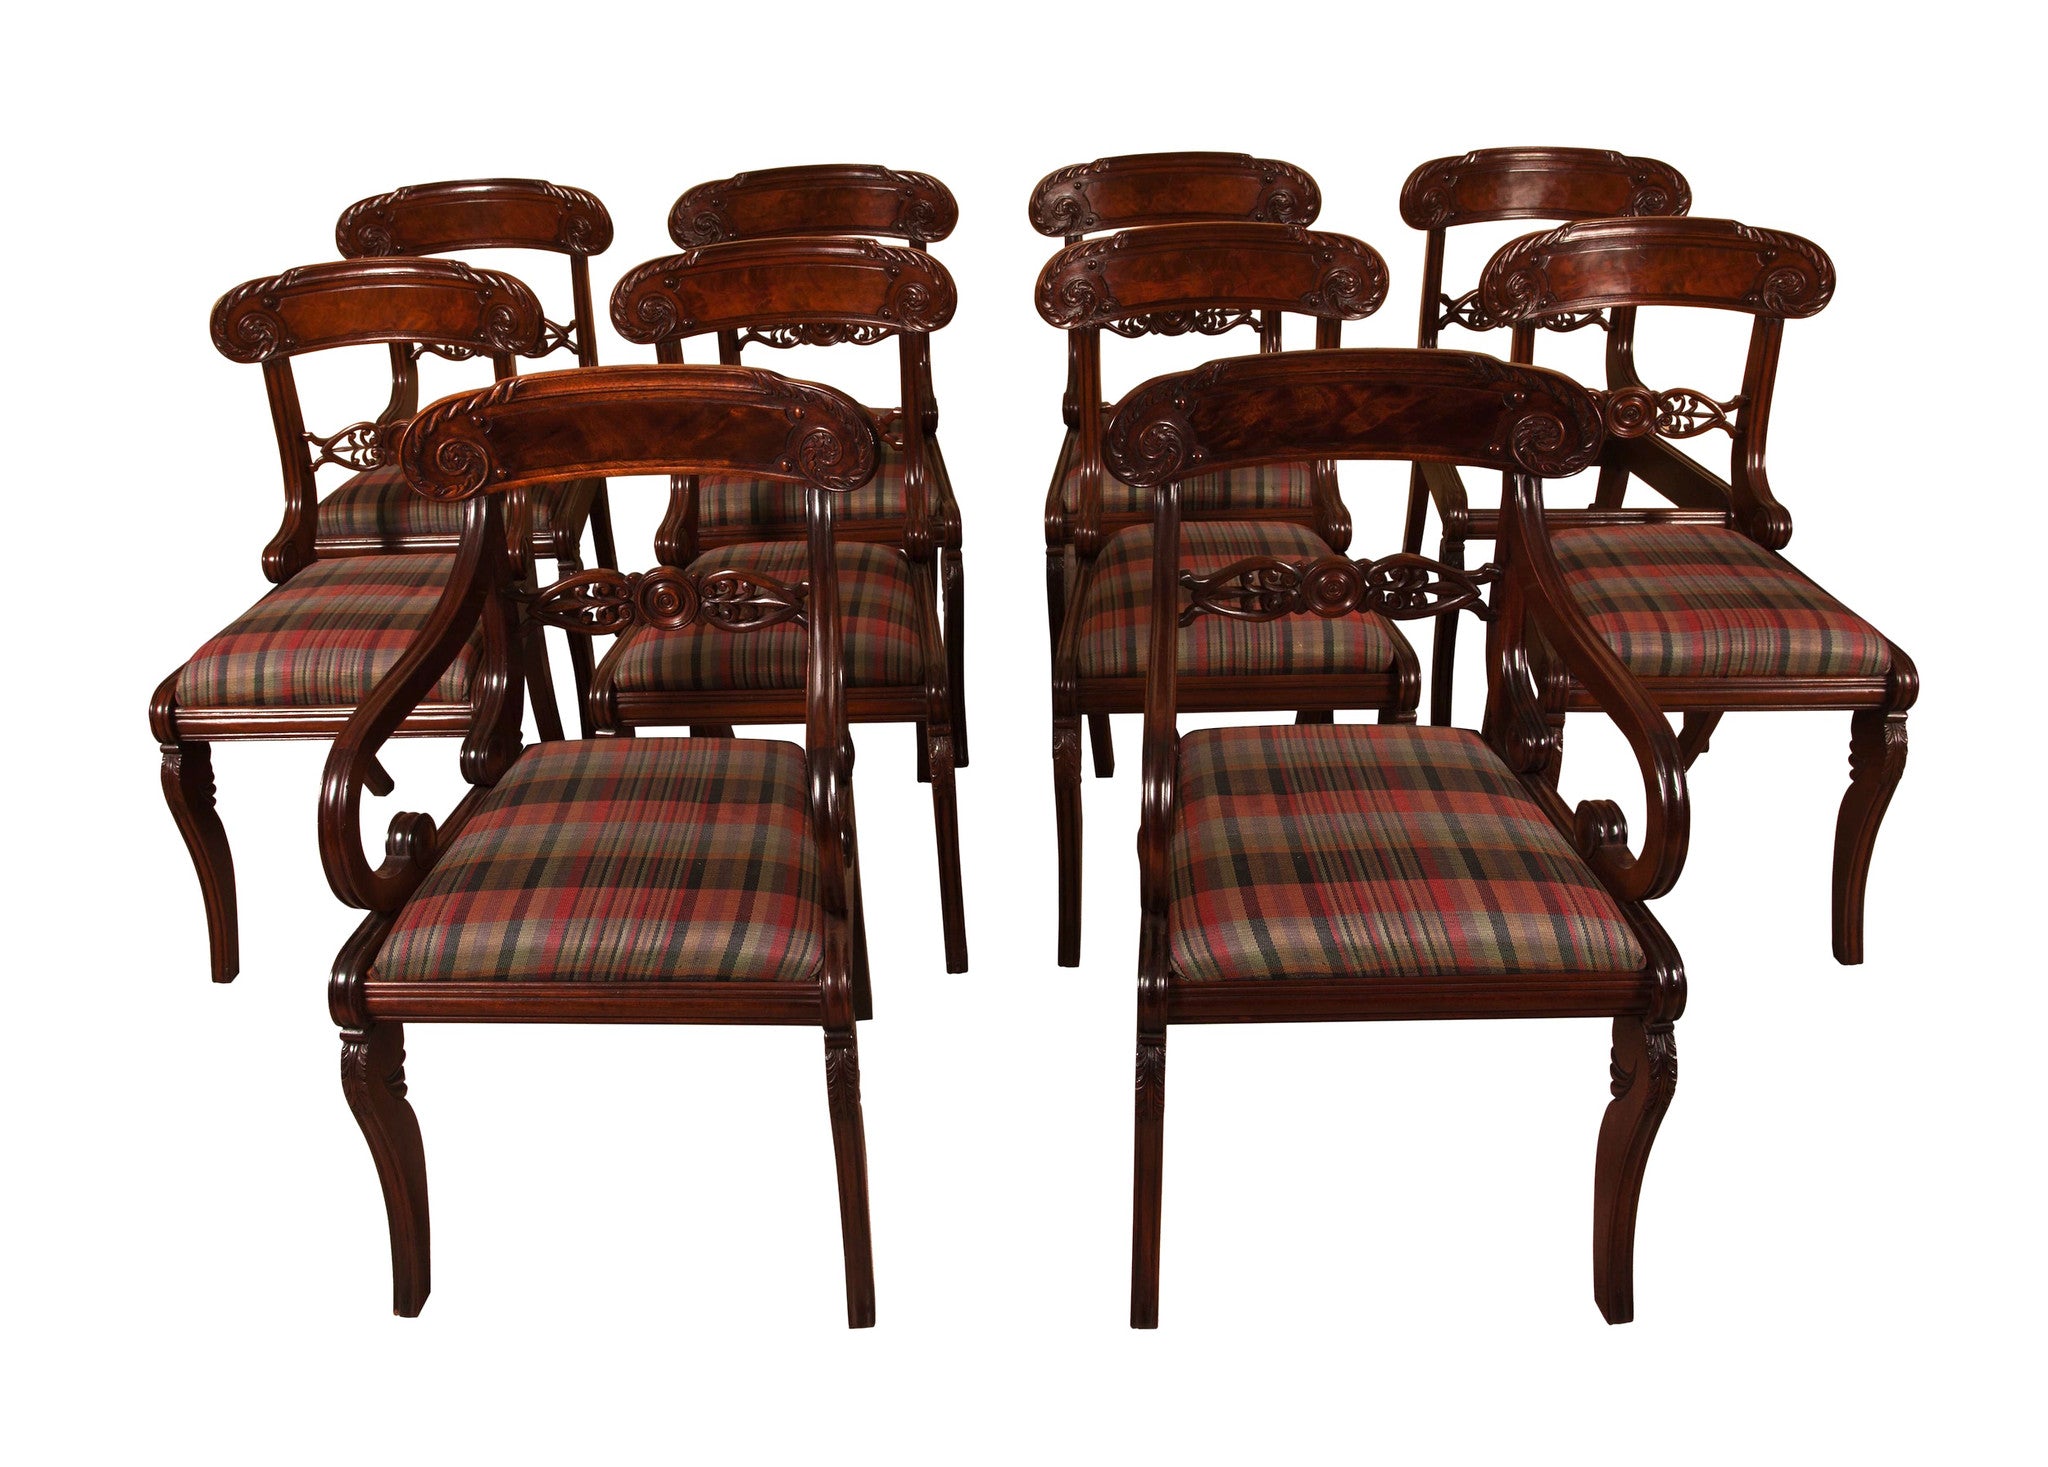 GARNERS ANTIQUES: Antique Dining Chairs for sale UK – Garners